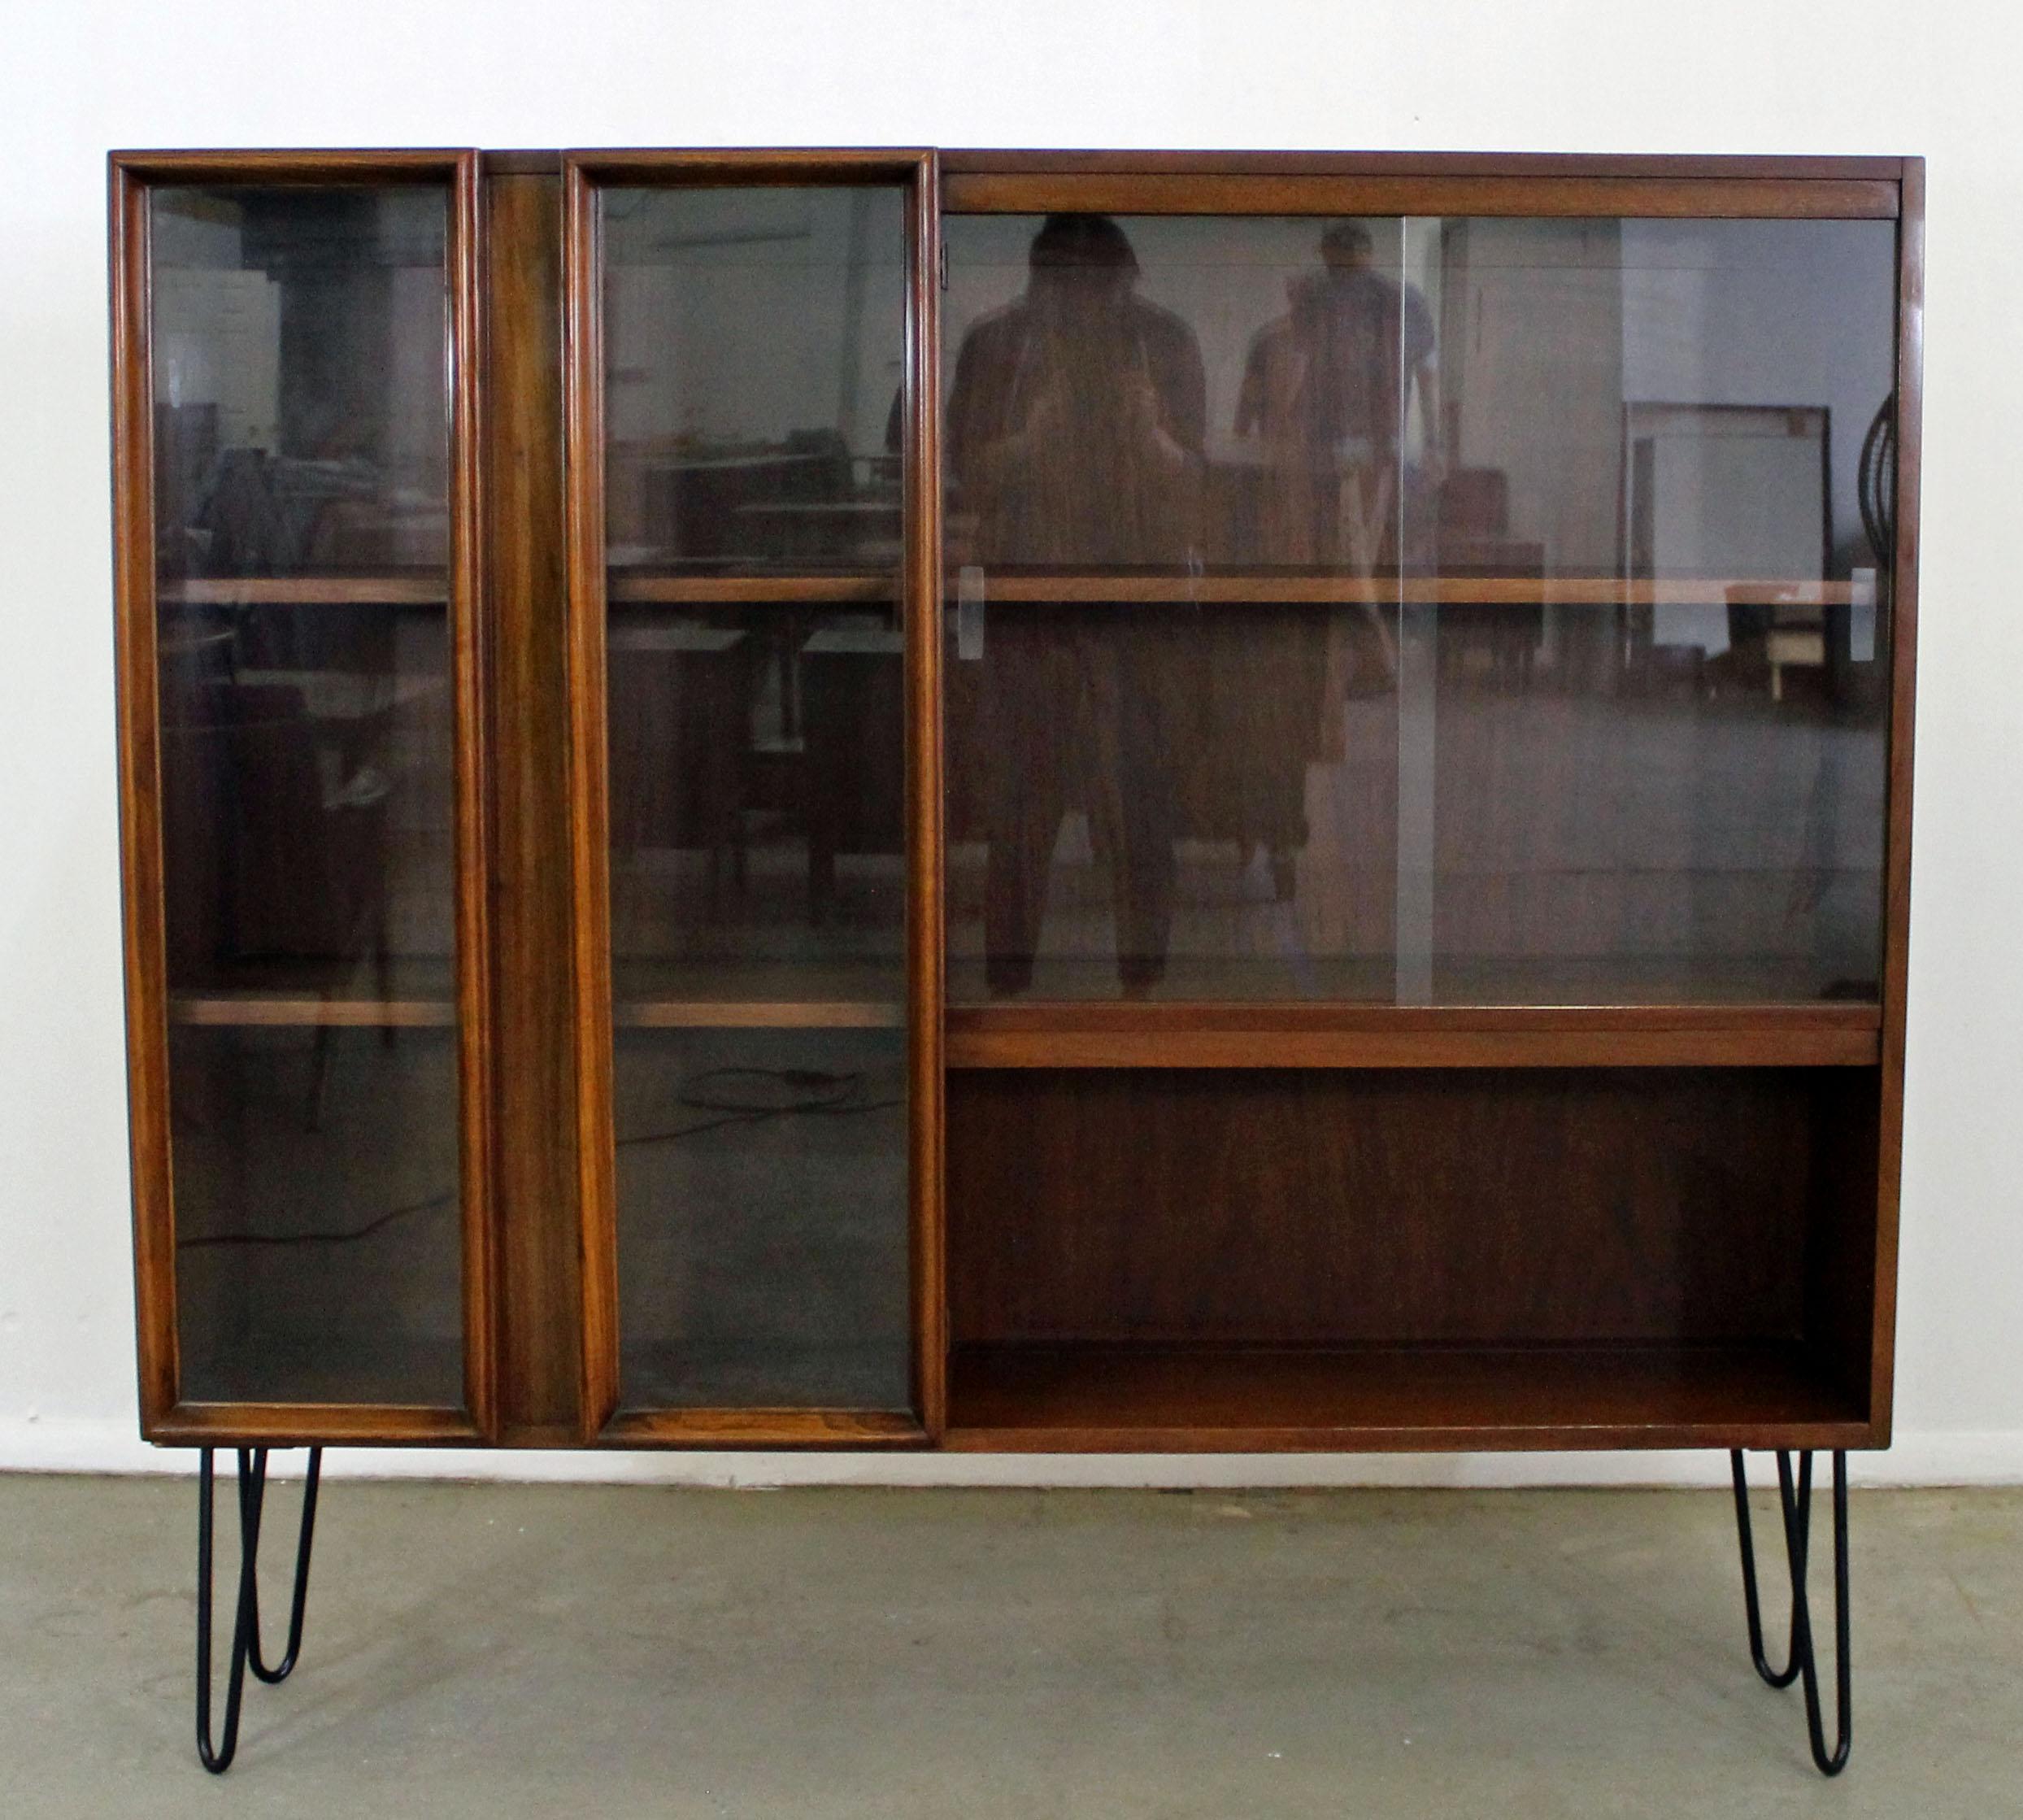 Offered is a piece of time and design; a Mid-Century Modern bookcase on hairpin legs. This piece has been up-cycled from a hutch top to a bookcase with metal 'hairpin' legs. It is made of walnut, featuring glass two glass doors on the right side and